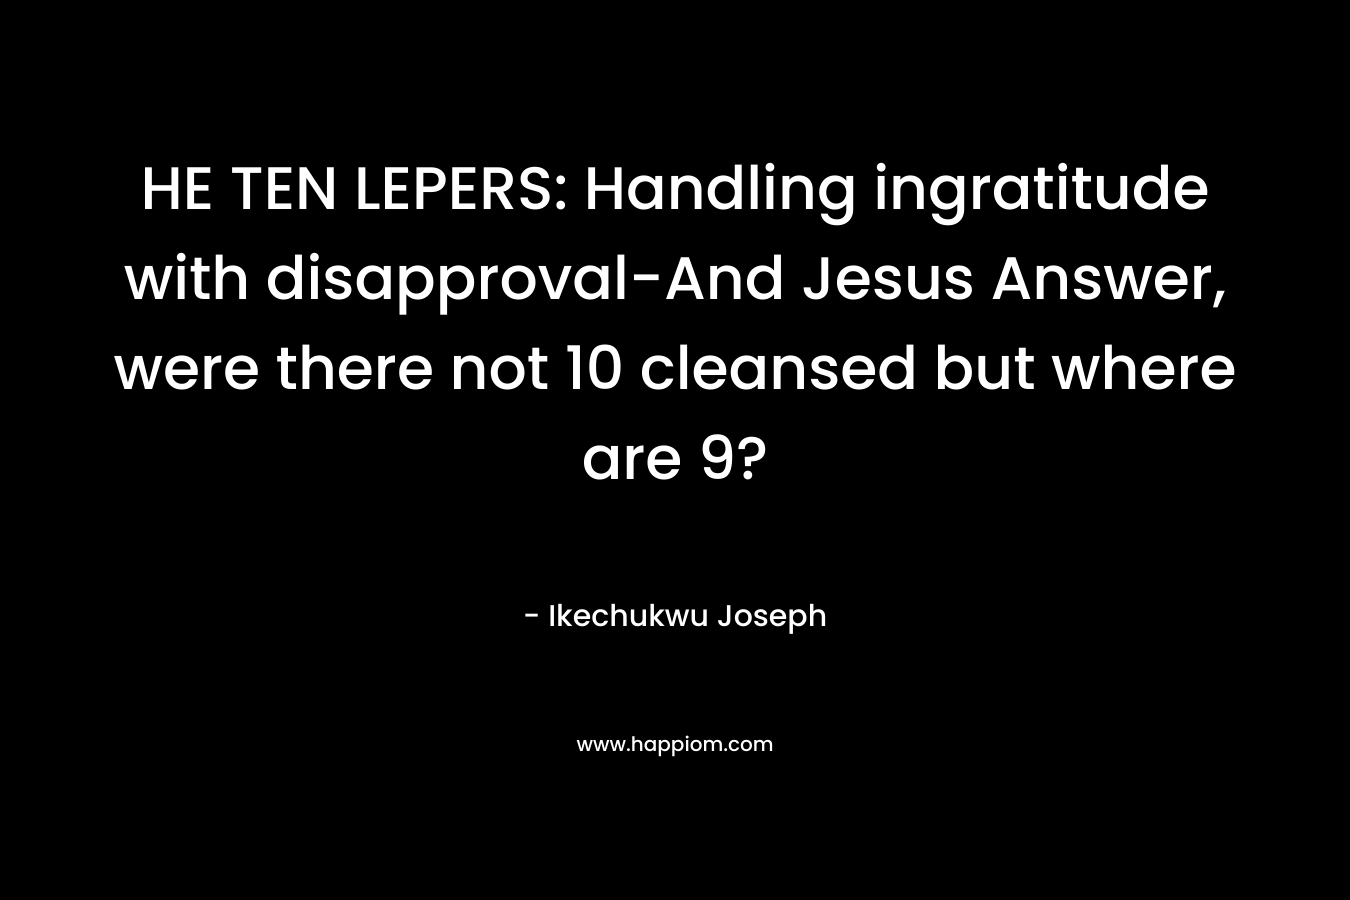 HE TEN LEPERS: Handling ingratitude with disapproval-And Jesus Answer, were there not 10 cleansed but where are 9?